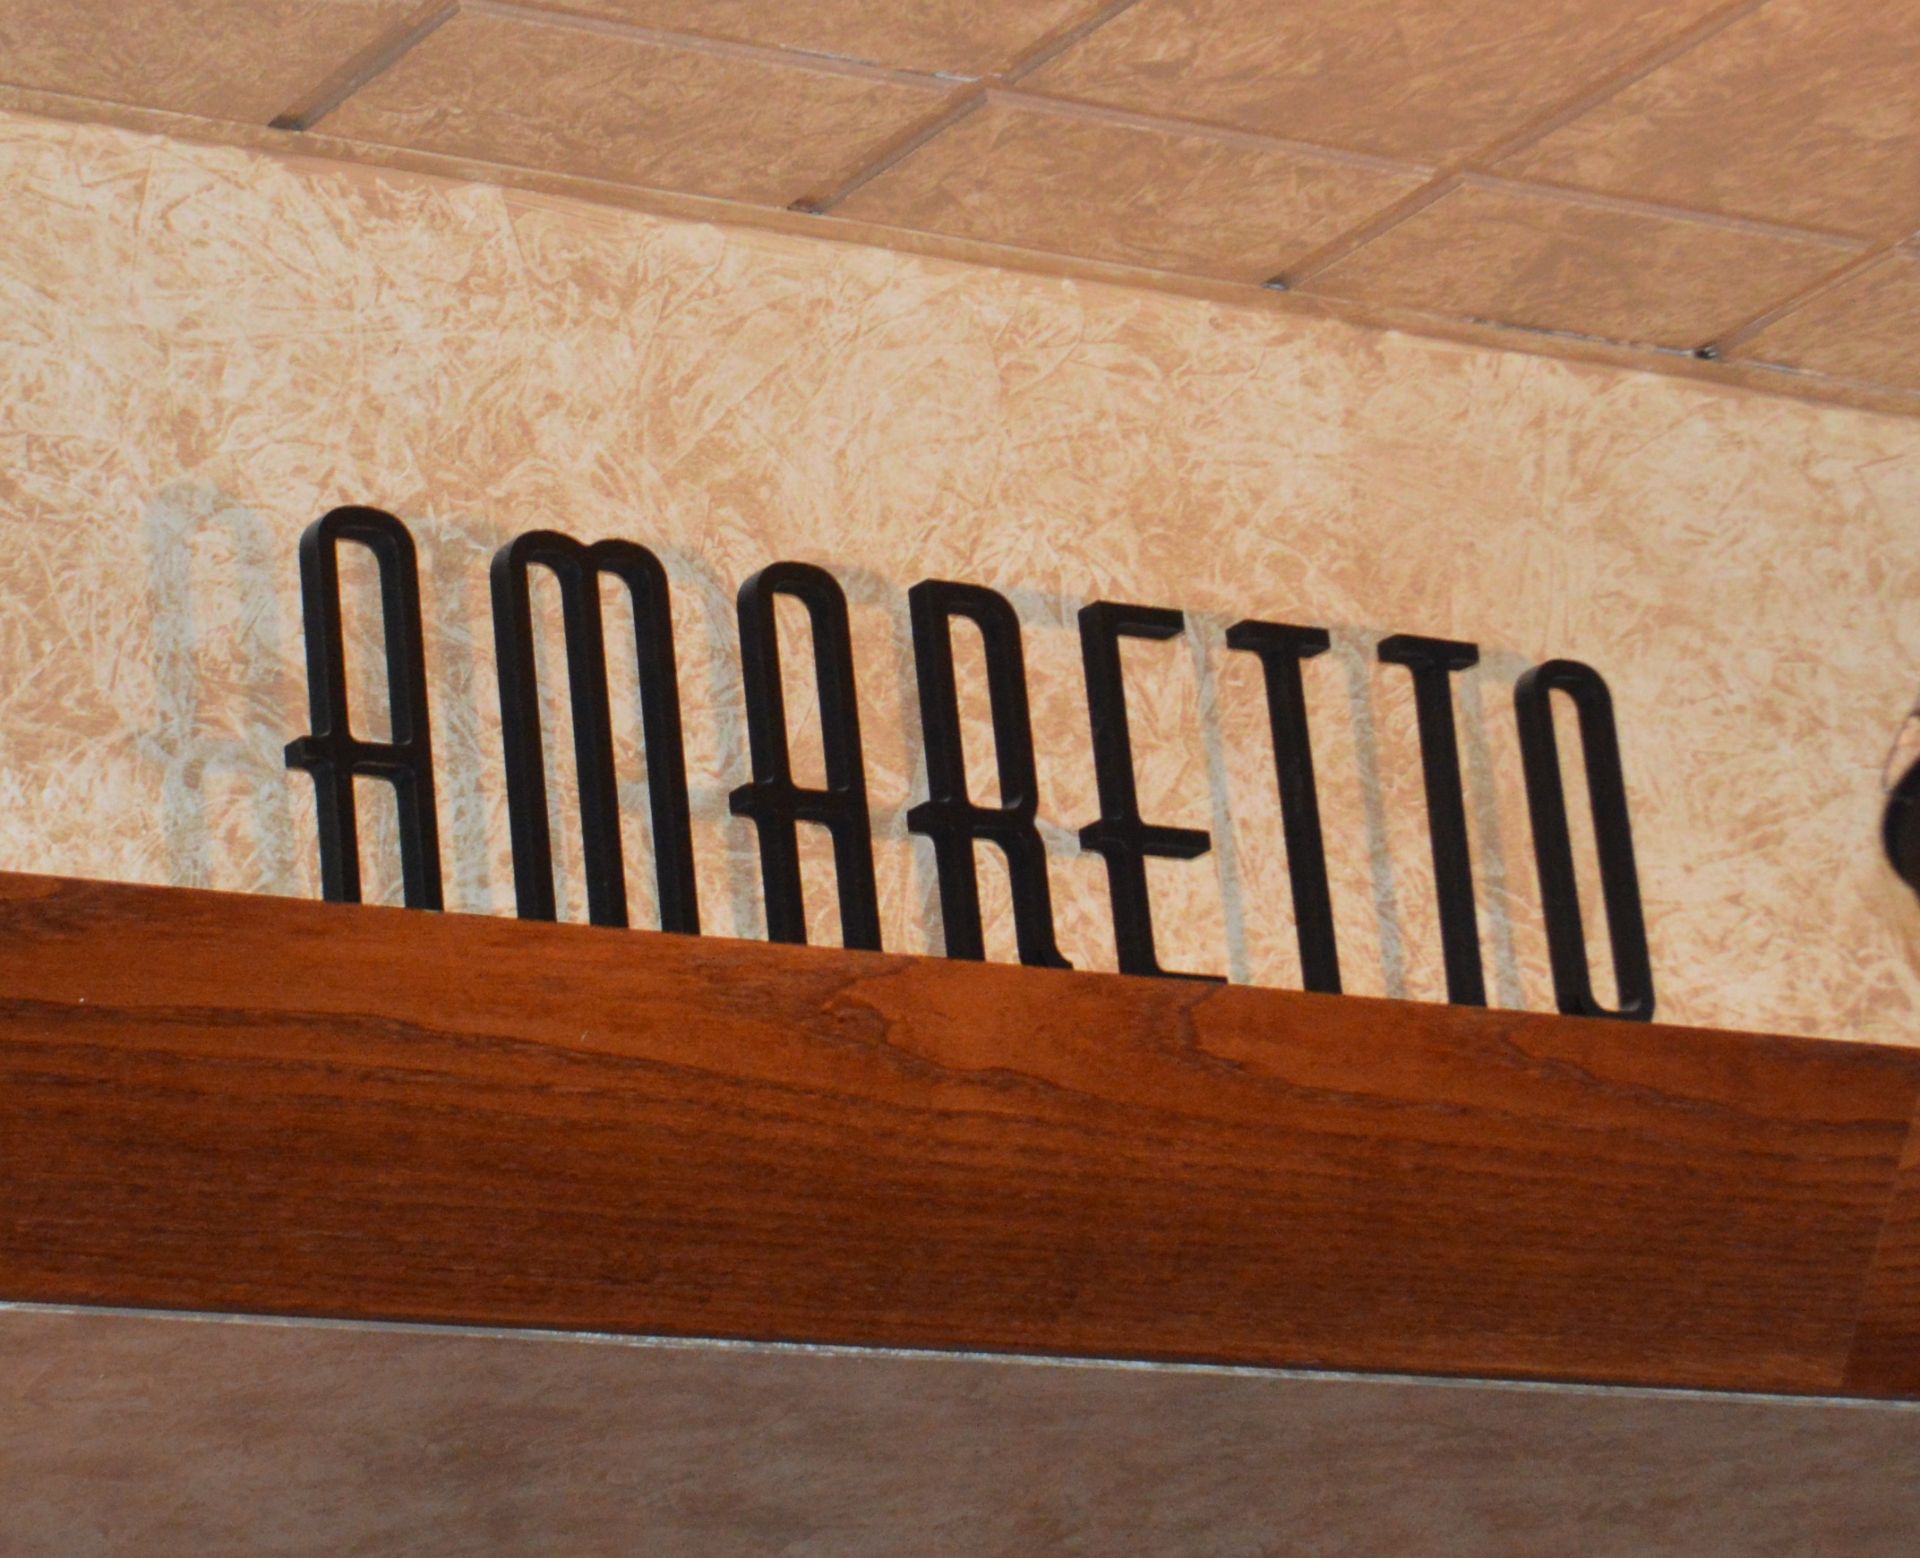 40 x Wooden Signs Suitable For Restaurants, Cafes, Bistros etc - Includes Grills, Amaretto, Penne, - Image 20 of 31